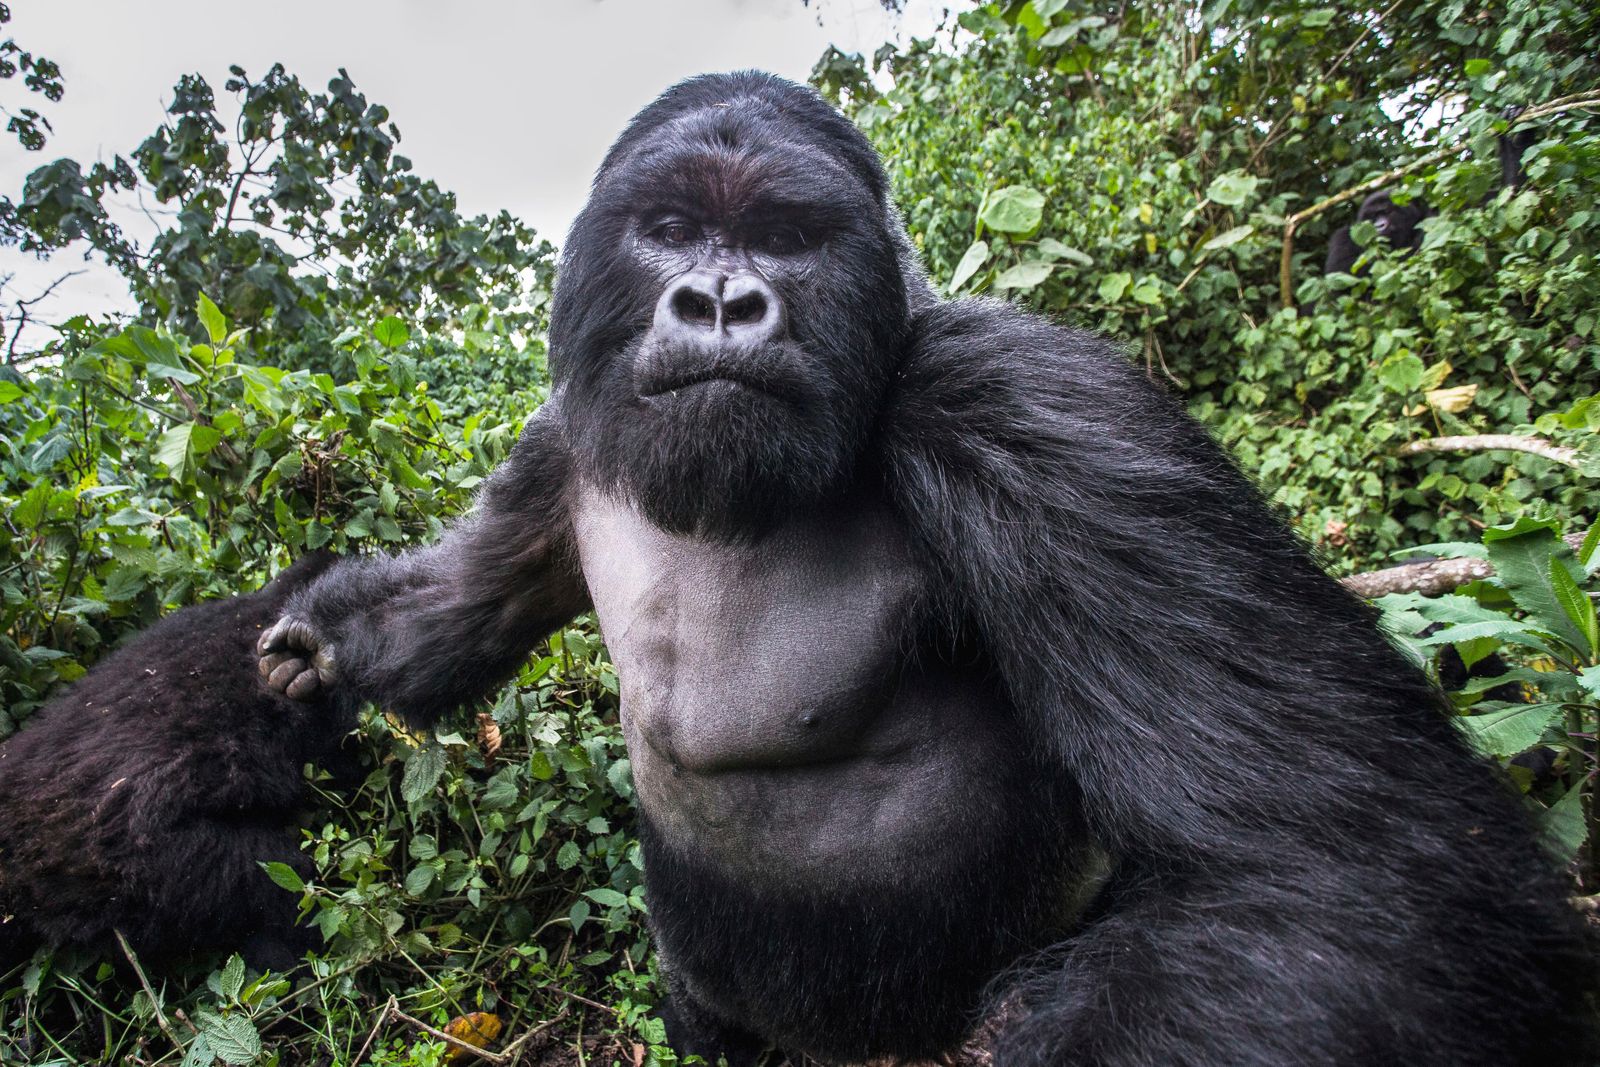 Can a Gorilla Really Get Drunk From Bamboo? | Science| Smithsonian ...